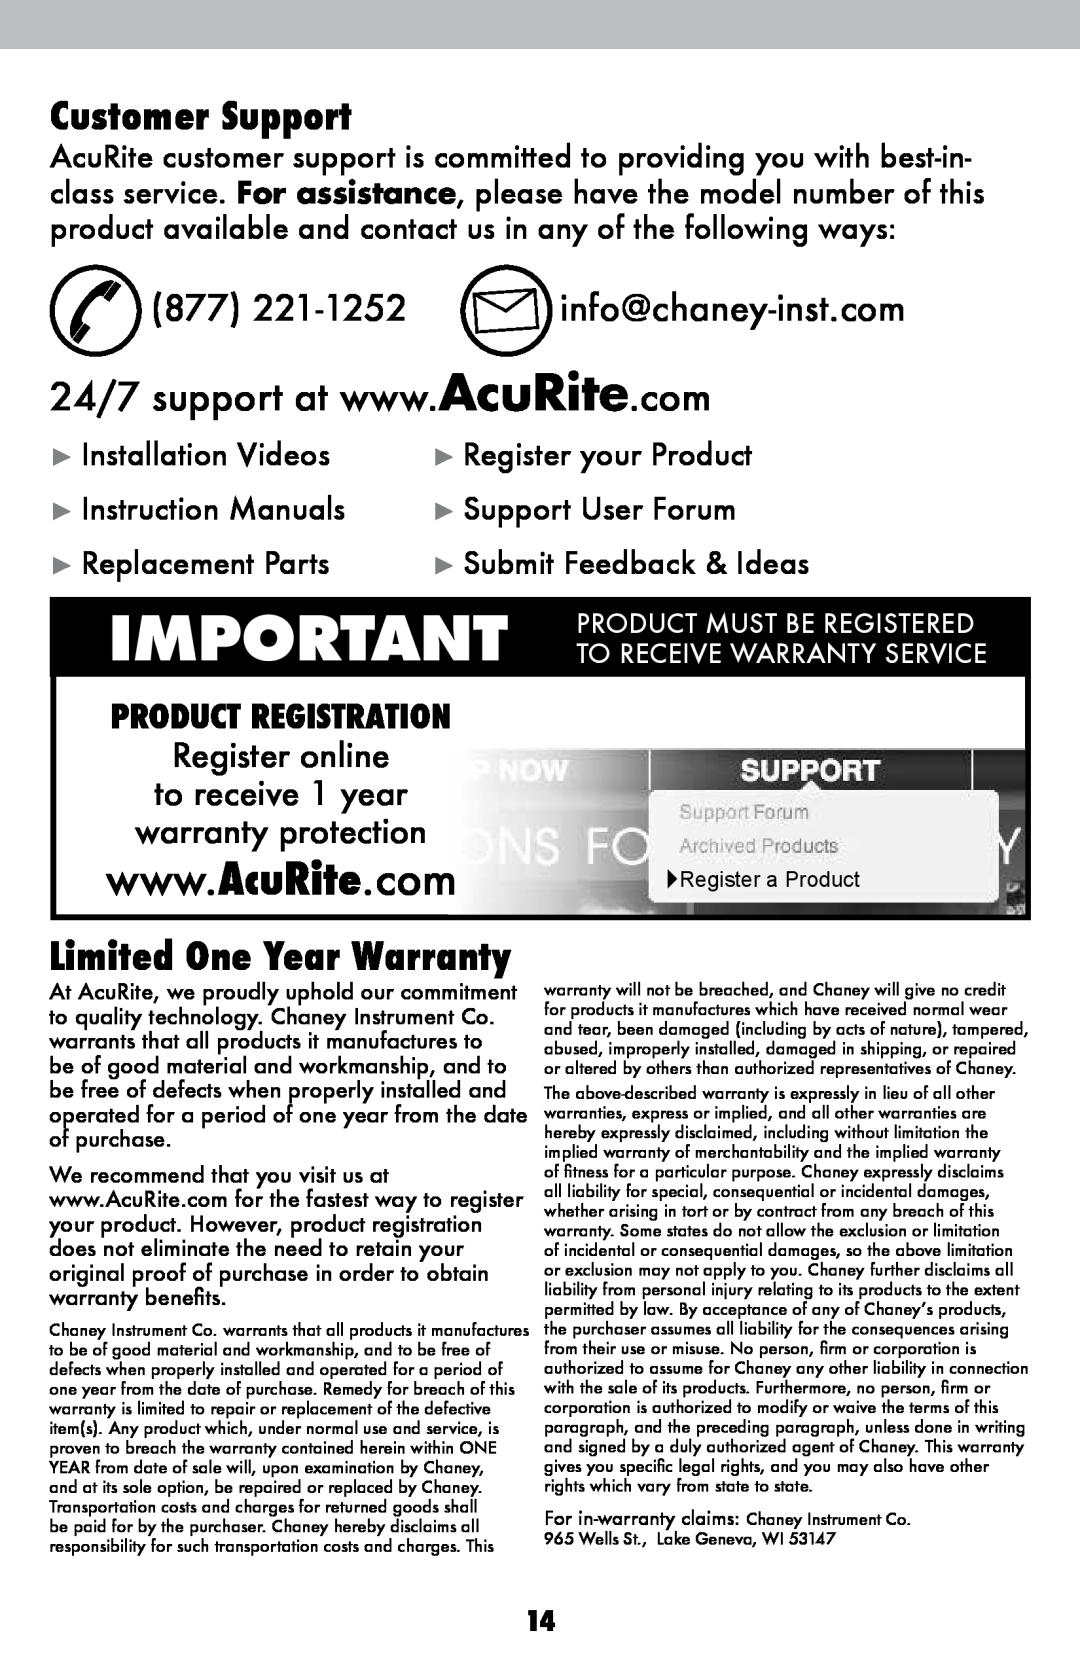 Acu-Rite 1086 Customer Support, 877 221-1252 info@chaney-inst.com, Limited One Year Warranty, Register online 